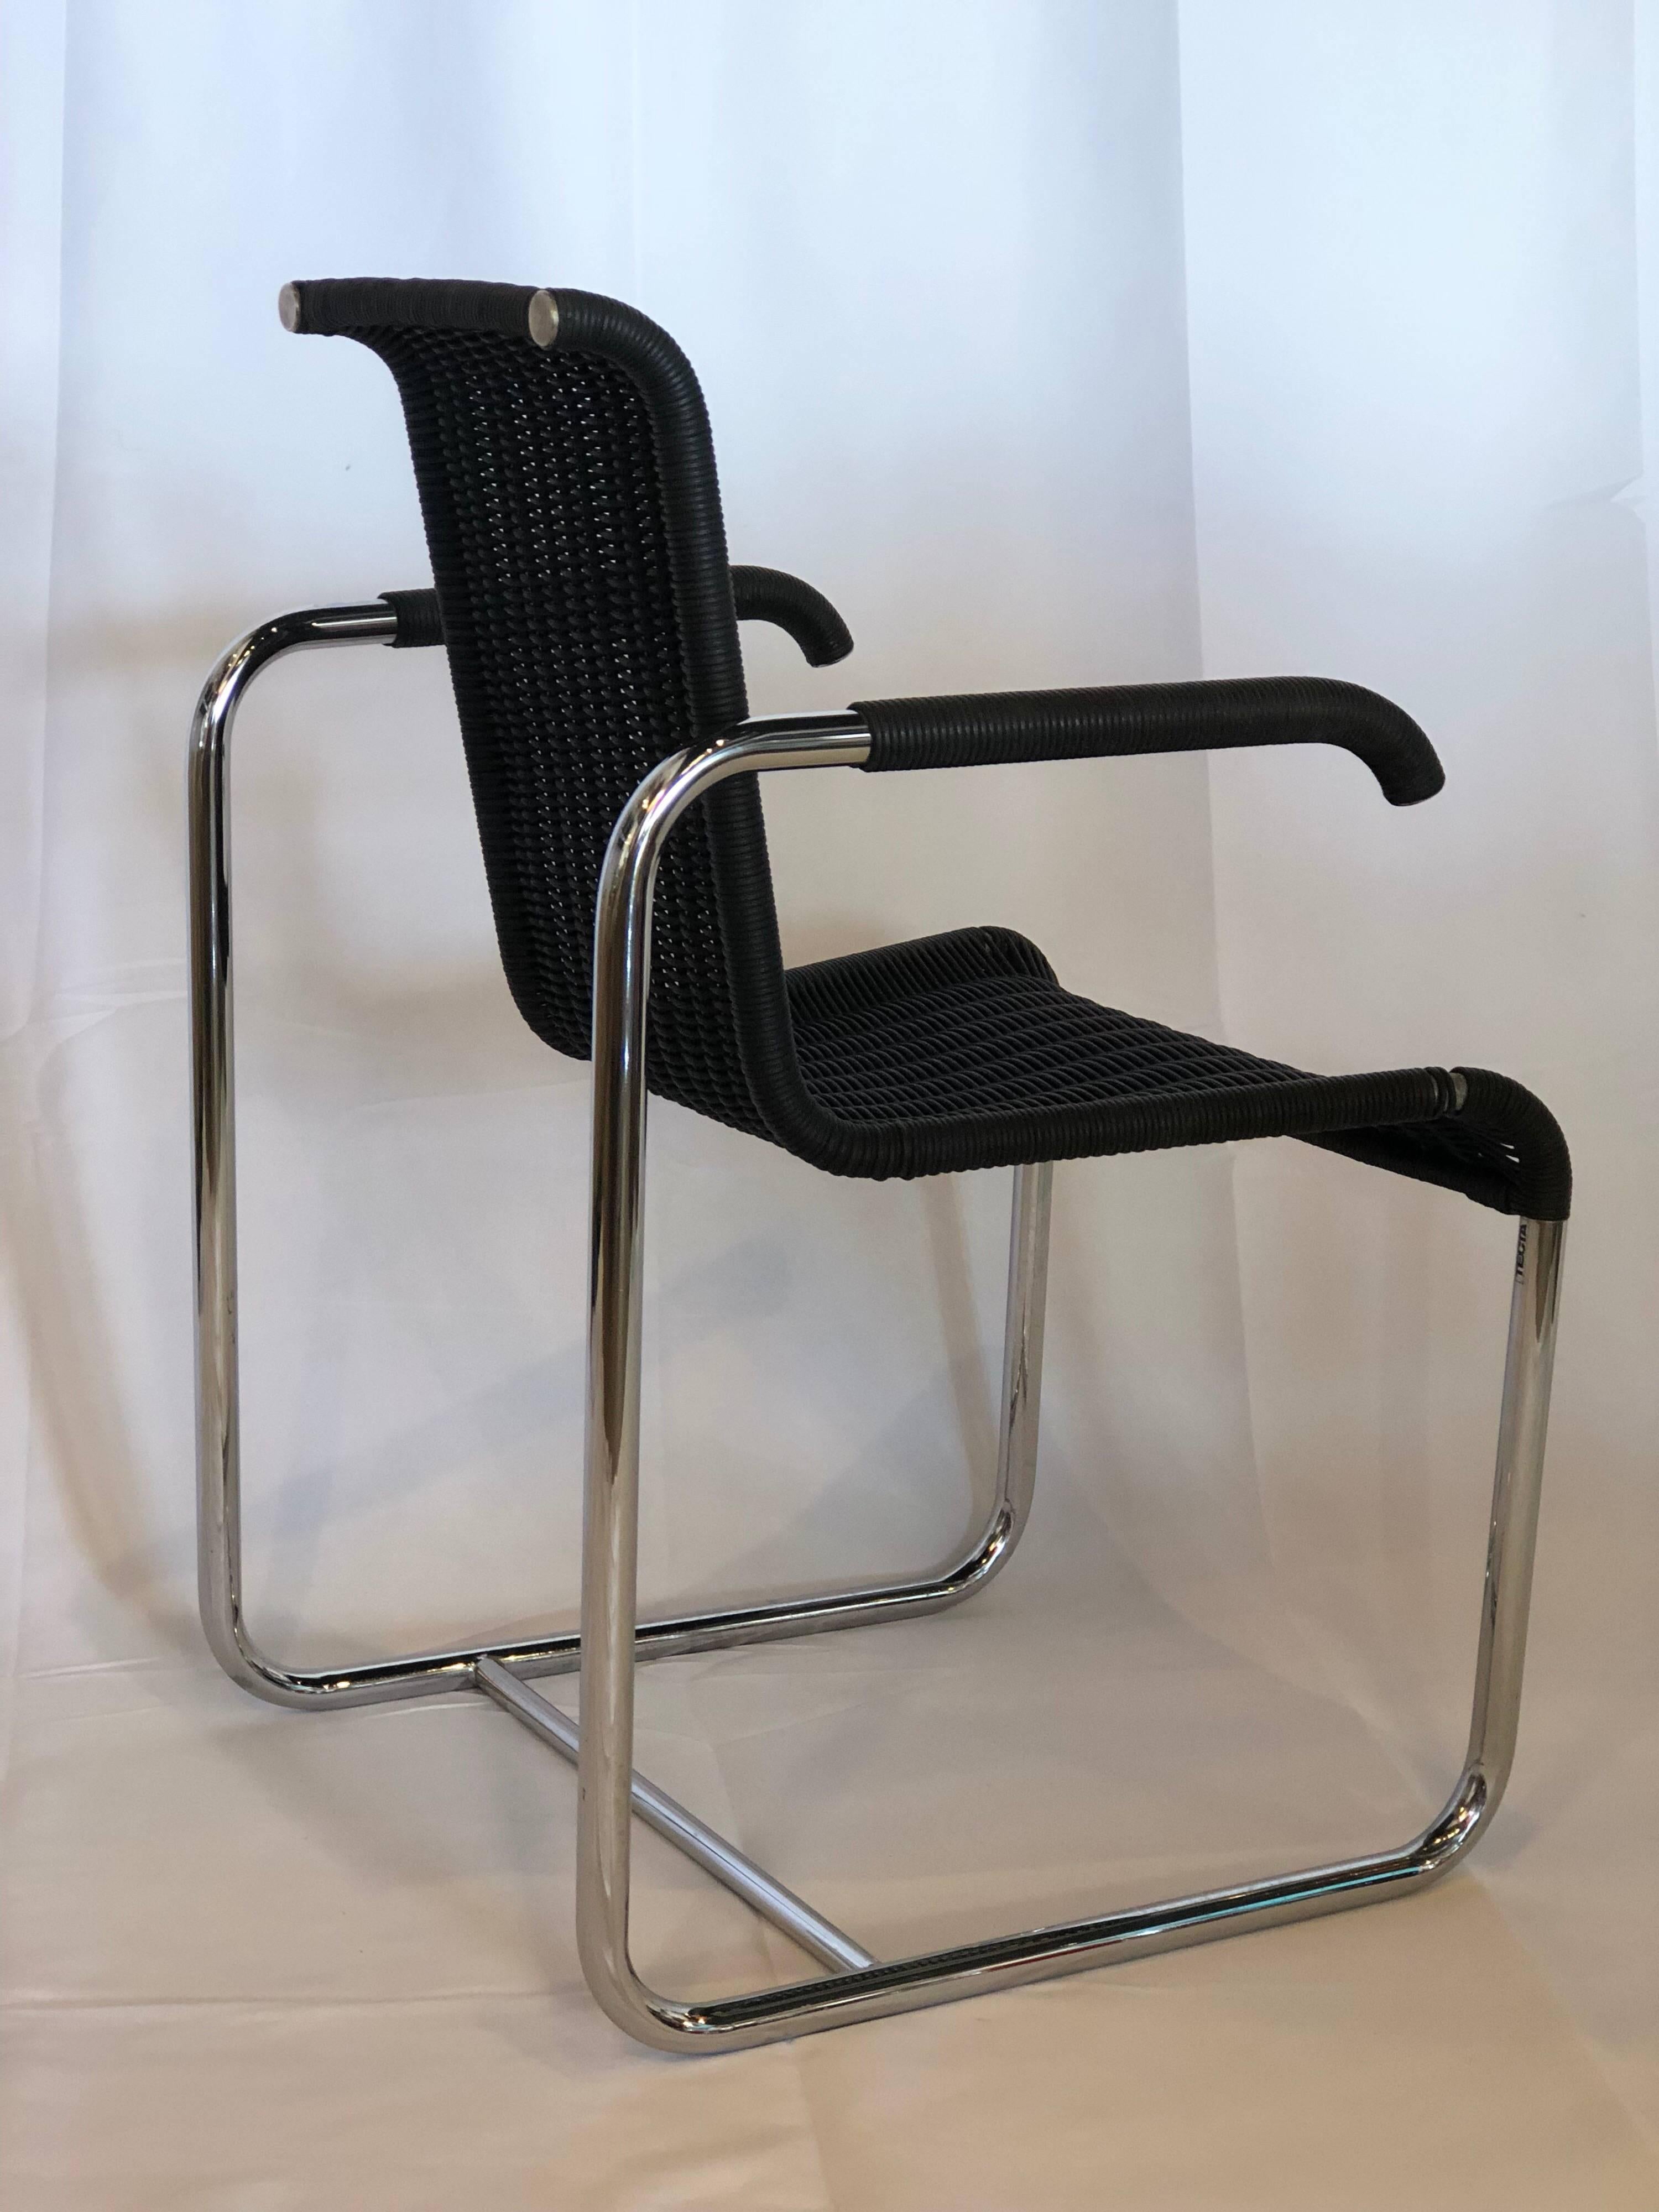 Hand-Woven Jean Prouvé D20 Stainless Steel Leather Wicker Chairs for Tecta, Germany, 1980s For Sale